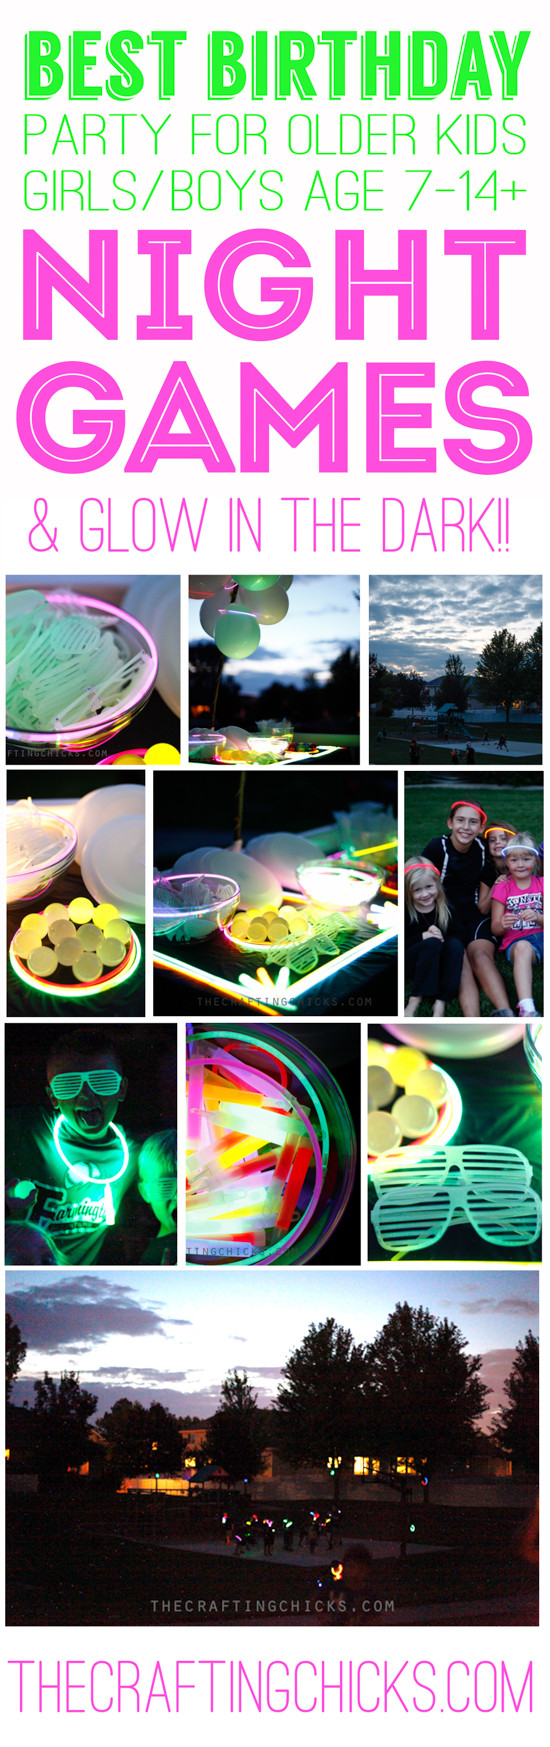 14 Birthday Party Ideas
 Best Birthday Party For Kids Ages 7 14 Girl Boy and